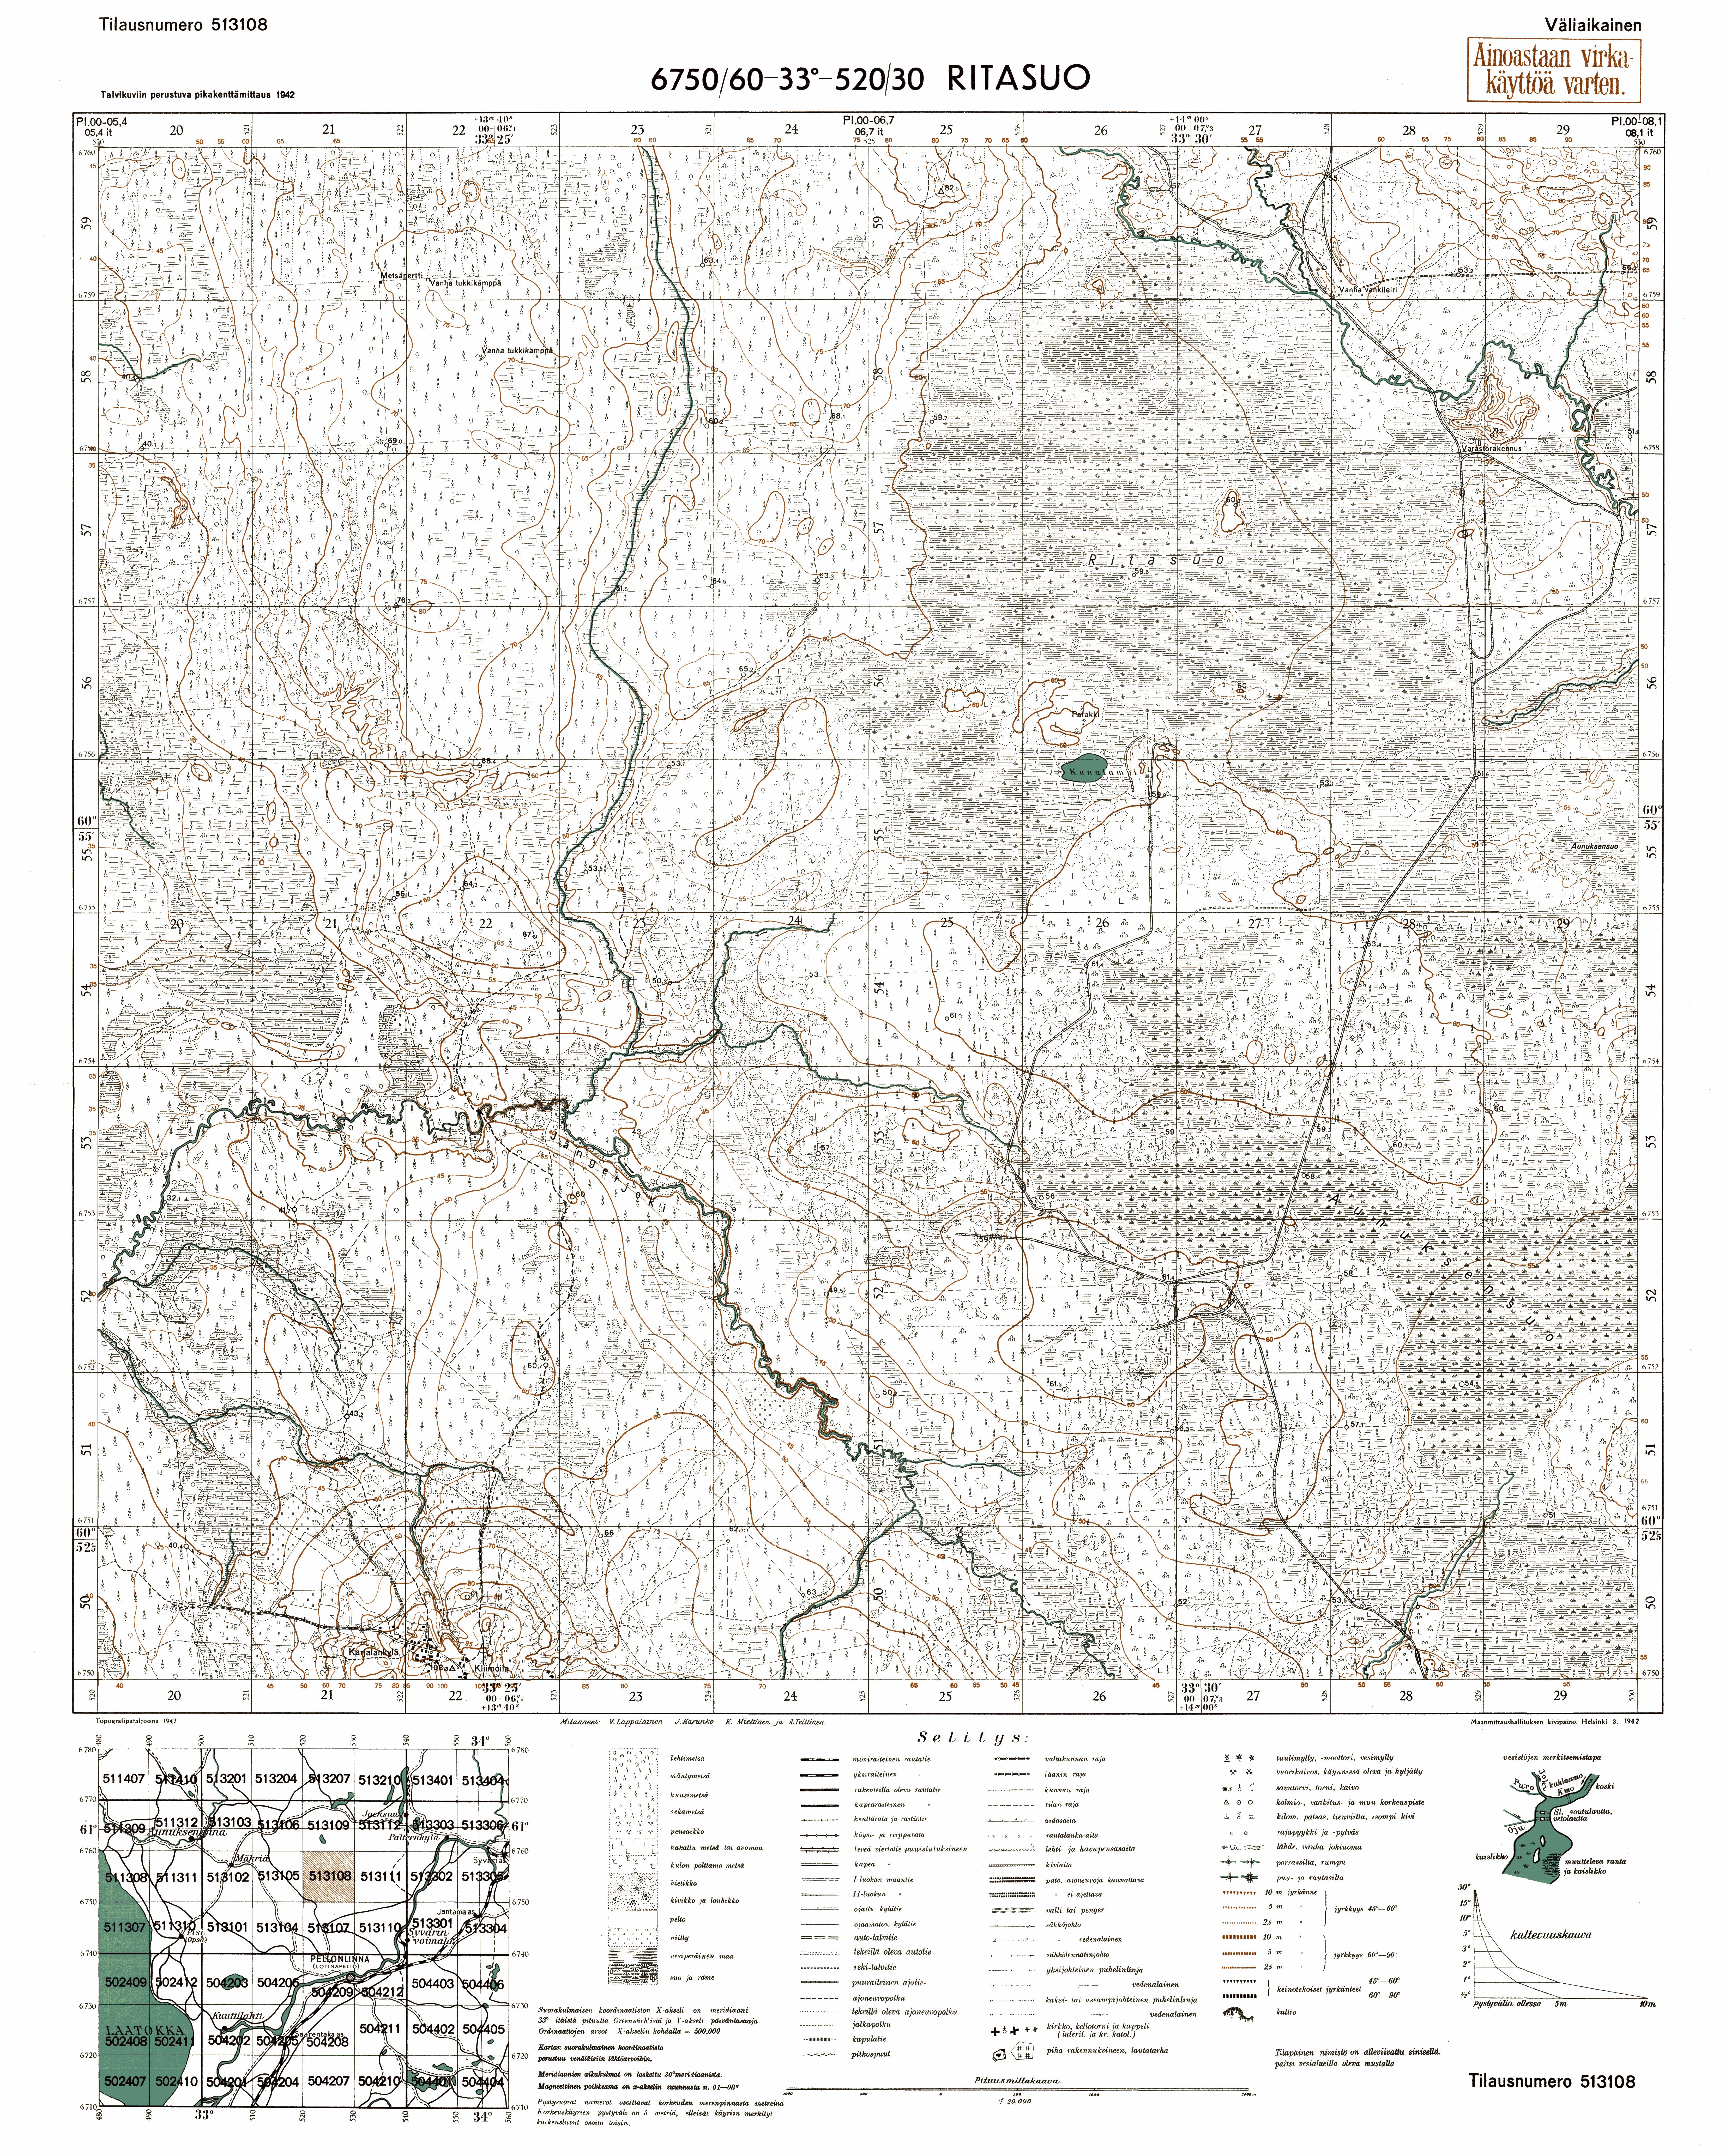 Ritsuboloto Marshes. Ritasuo. Topografikartta 513108. Topographic map from 1942. Use the zooming tool to explore in higher level of detail. Obtain as a quality print or high resolution image